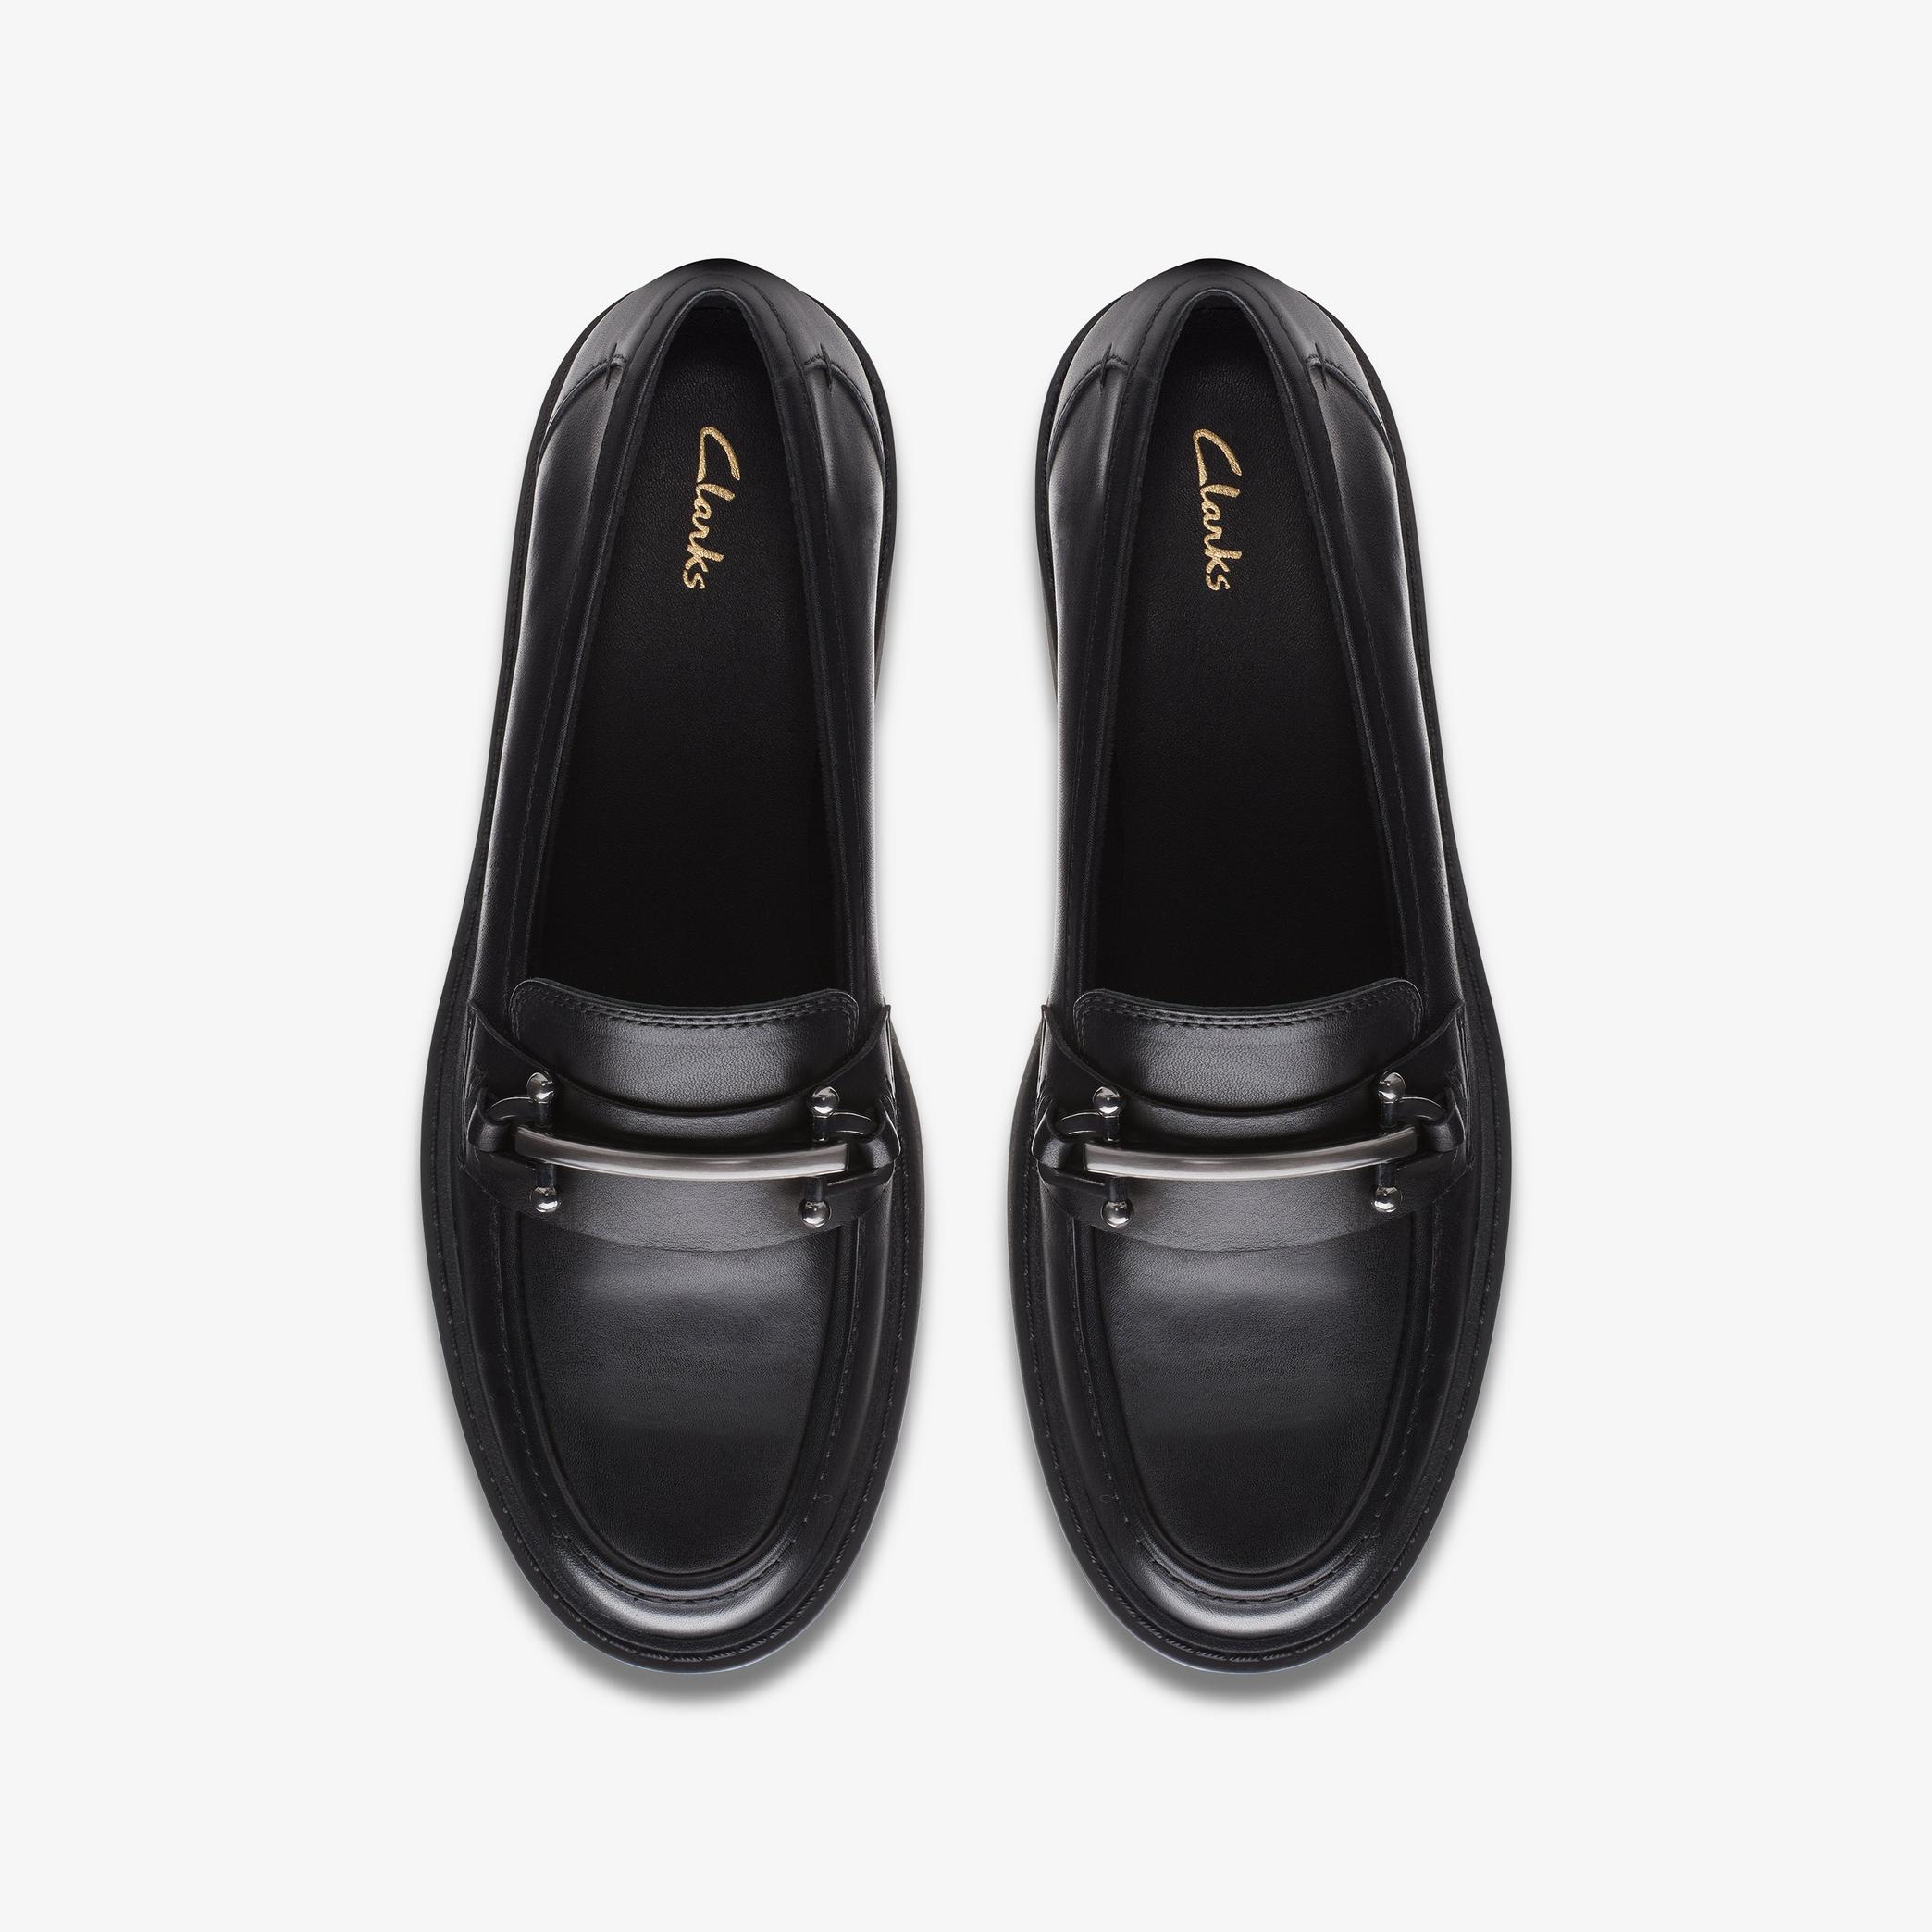 Orinoco2 Edge Black Leather Loafers, view 6 of 6